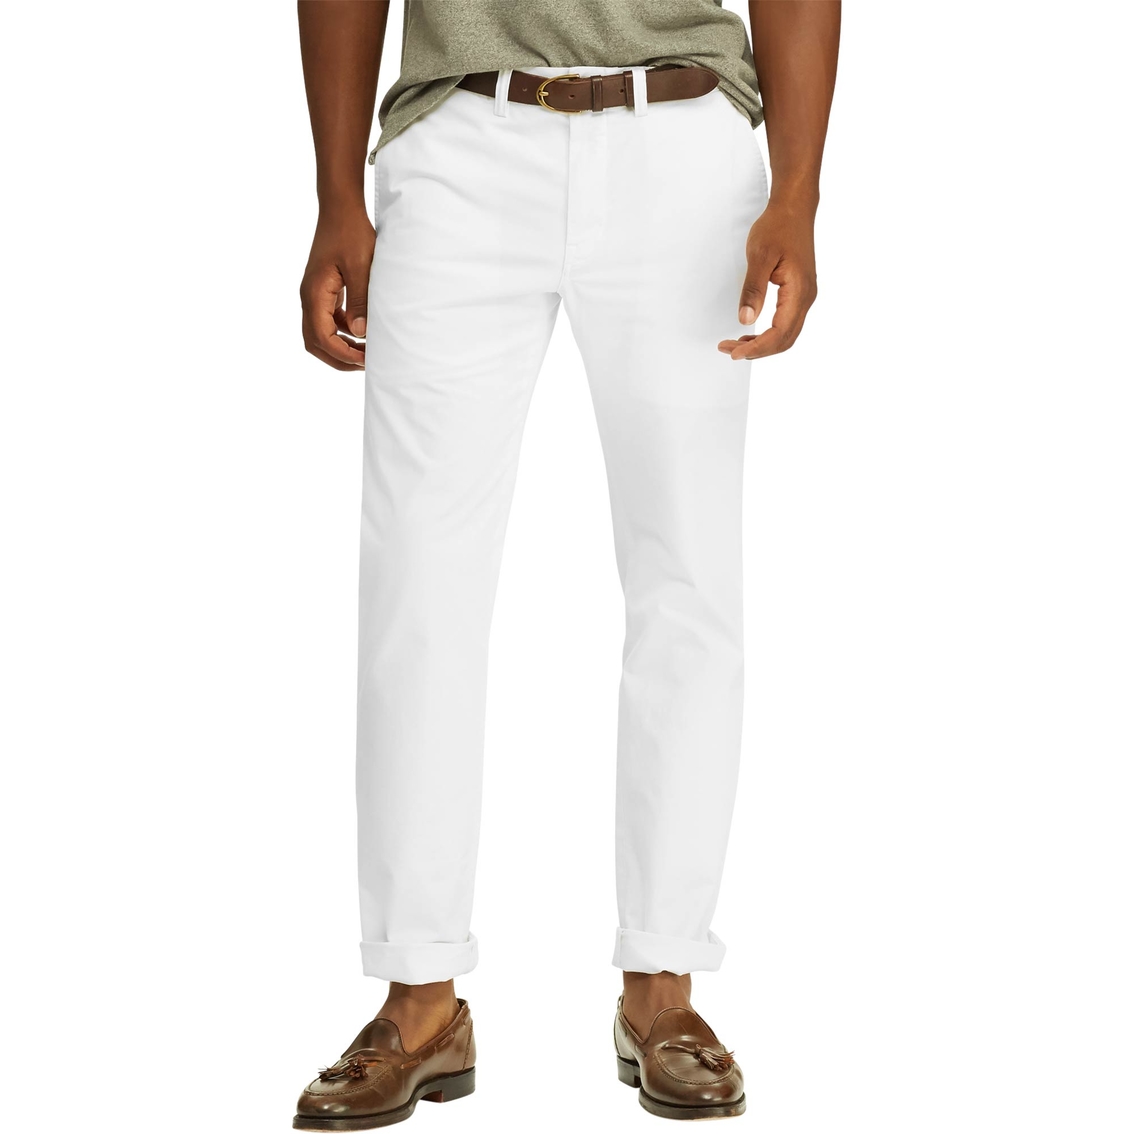 Polo Ralph Lauren Stretch Straight Fit Chino Pants | Pants | Clothing ...